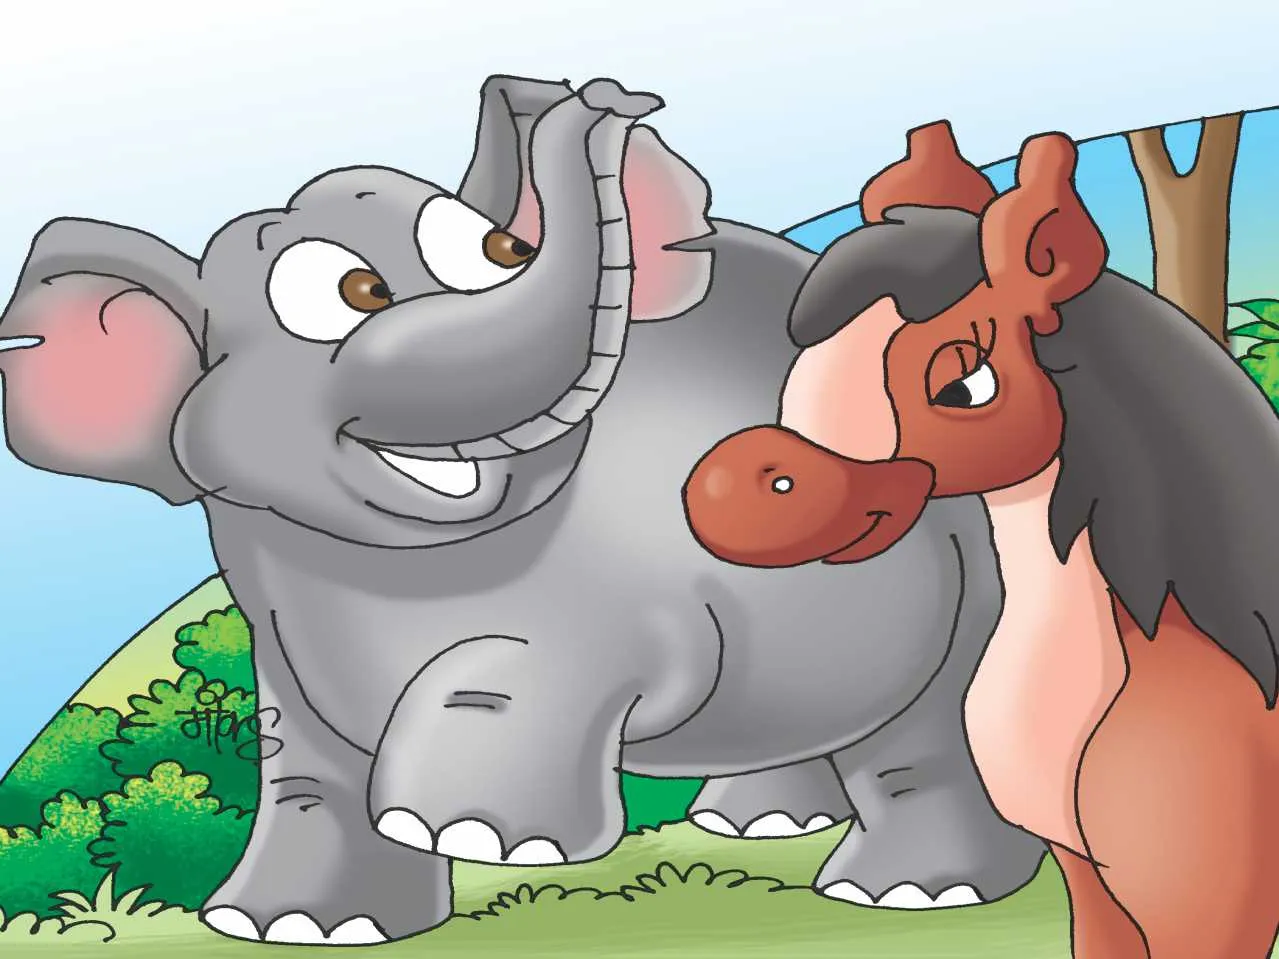 Elephant and Horse in Jungle cartoon image